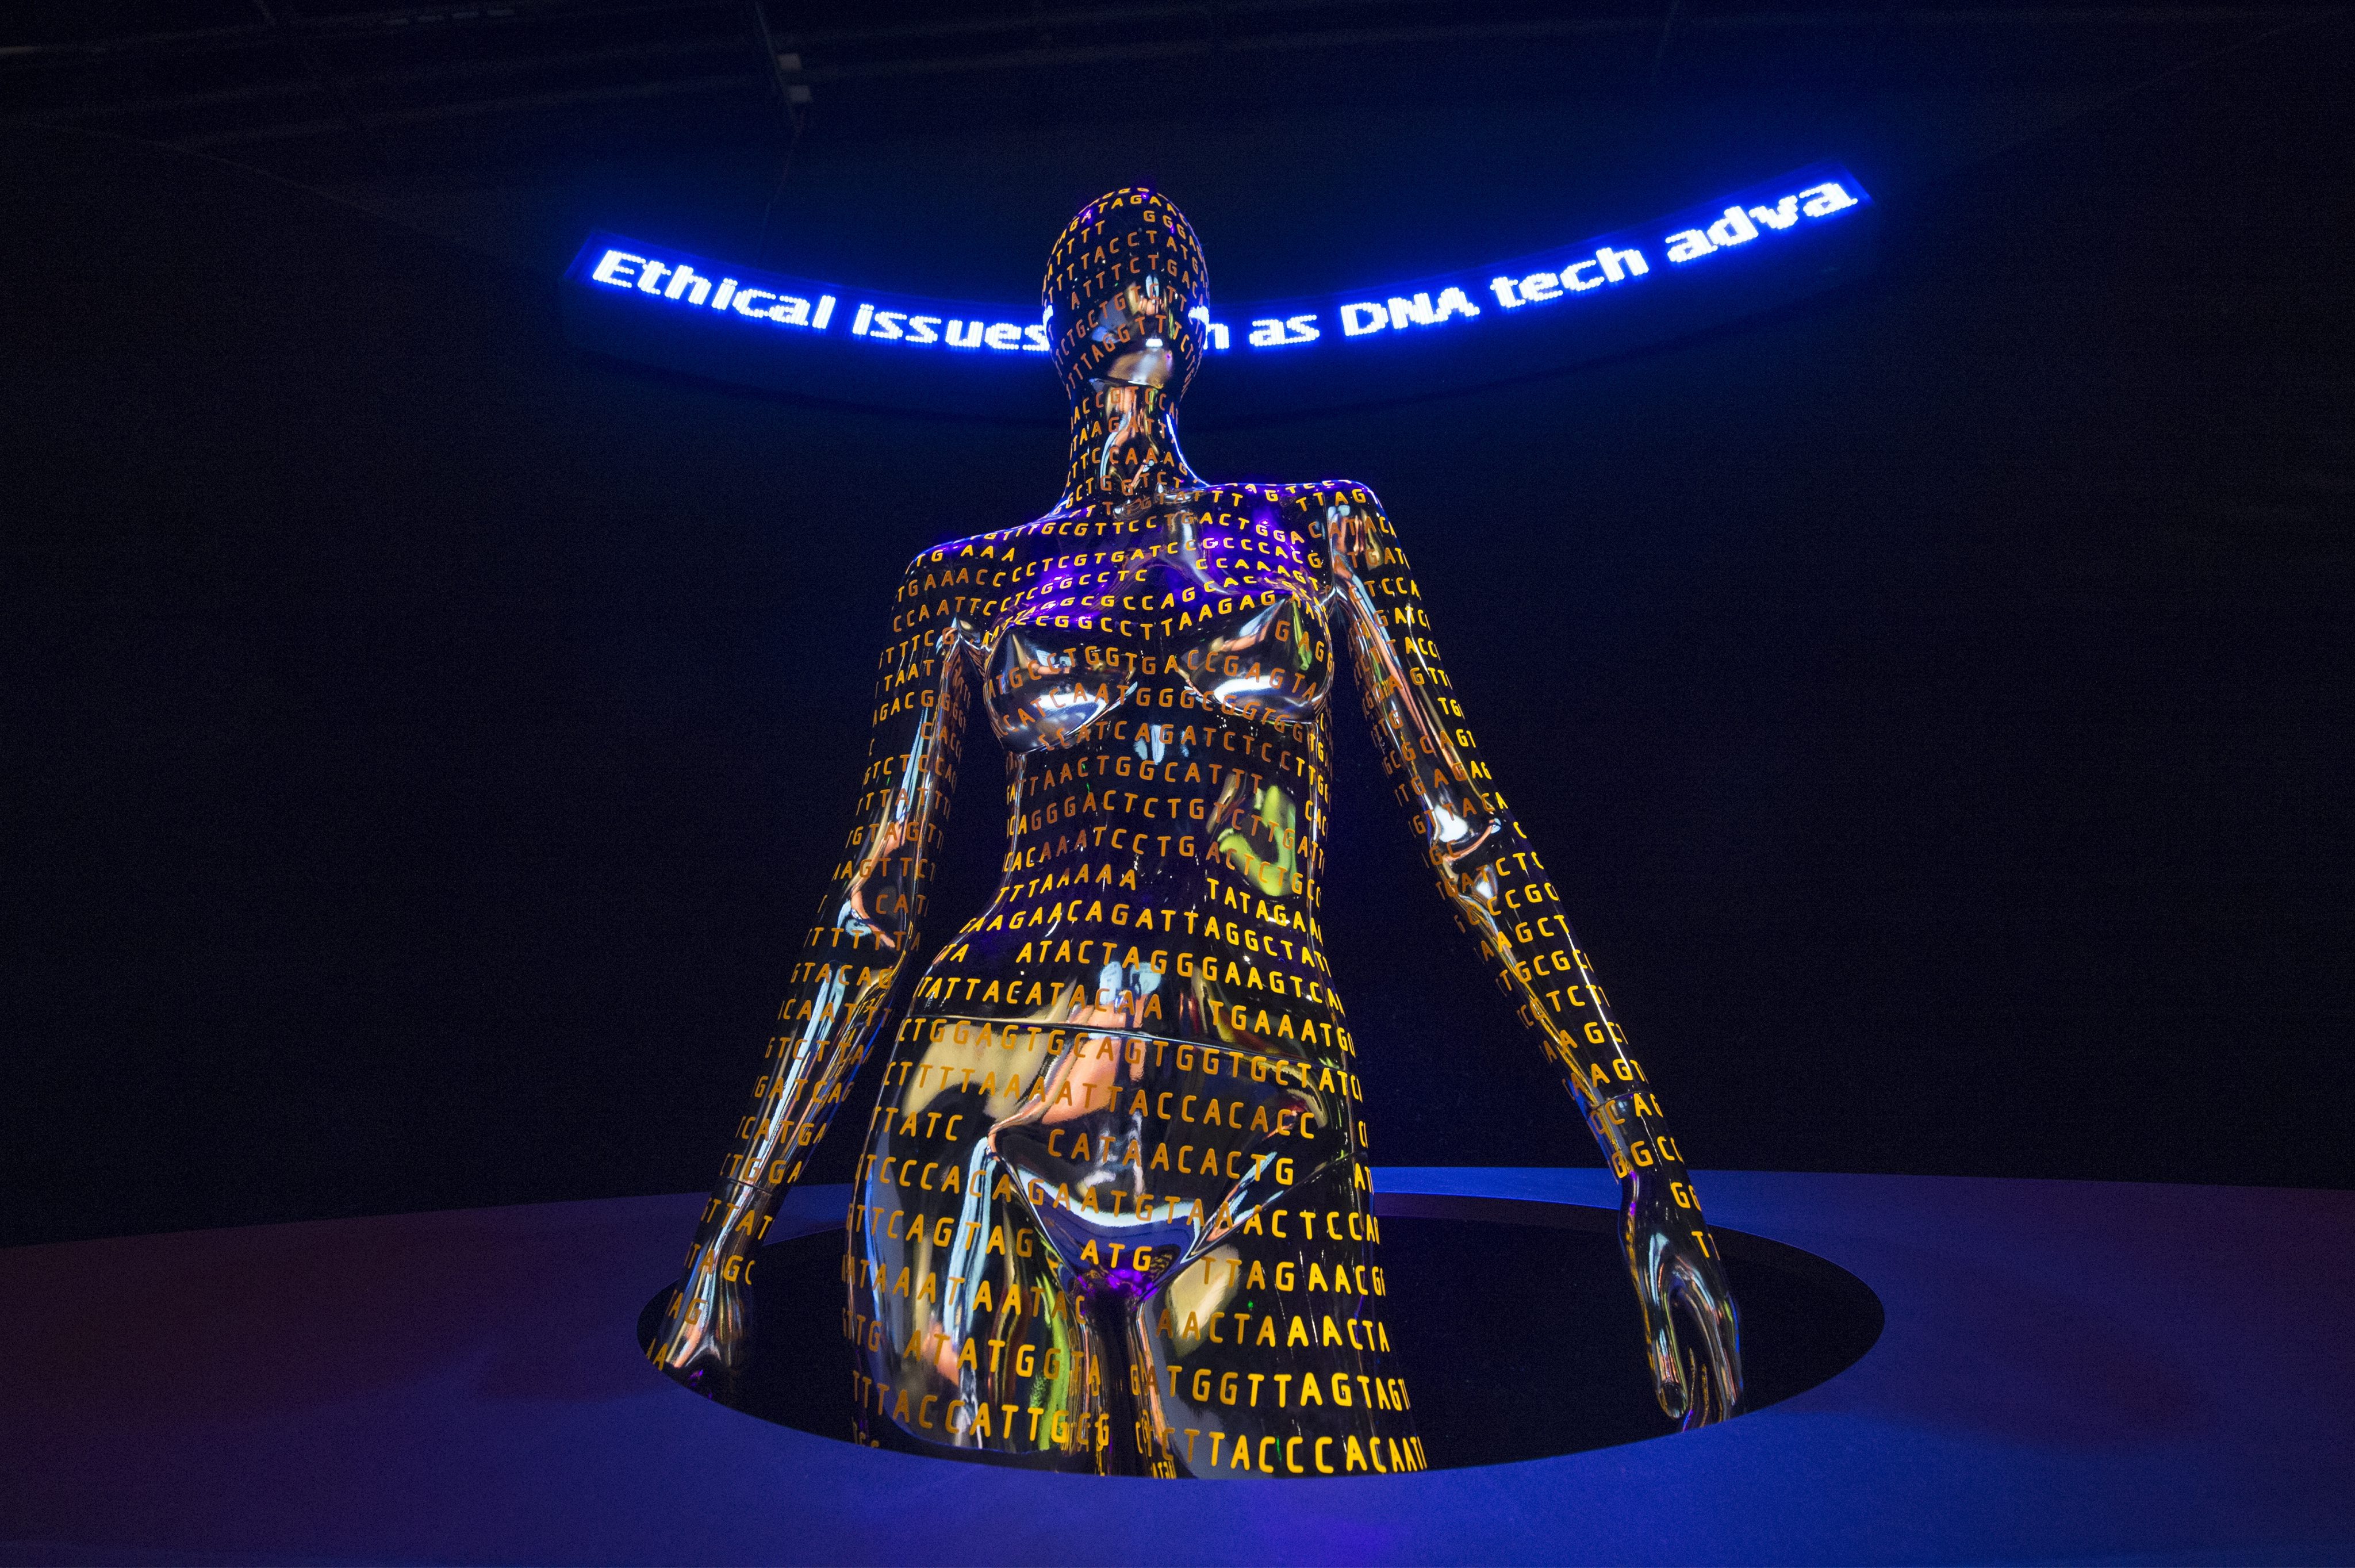 Bioethics encompasses questions about the start and end of life, and the impact of thrilling and frightening new technologies for human enhancement. Photo: EPA